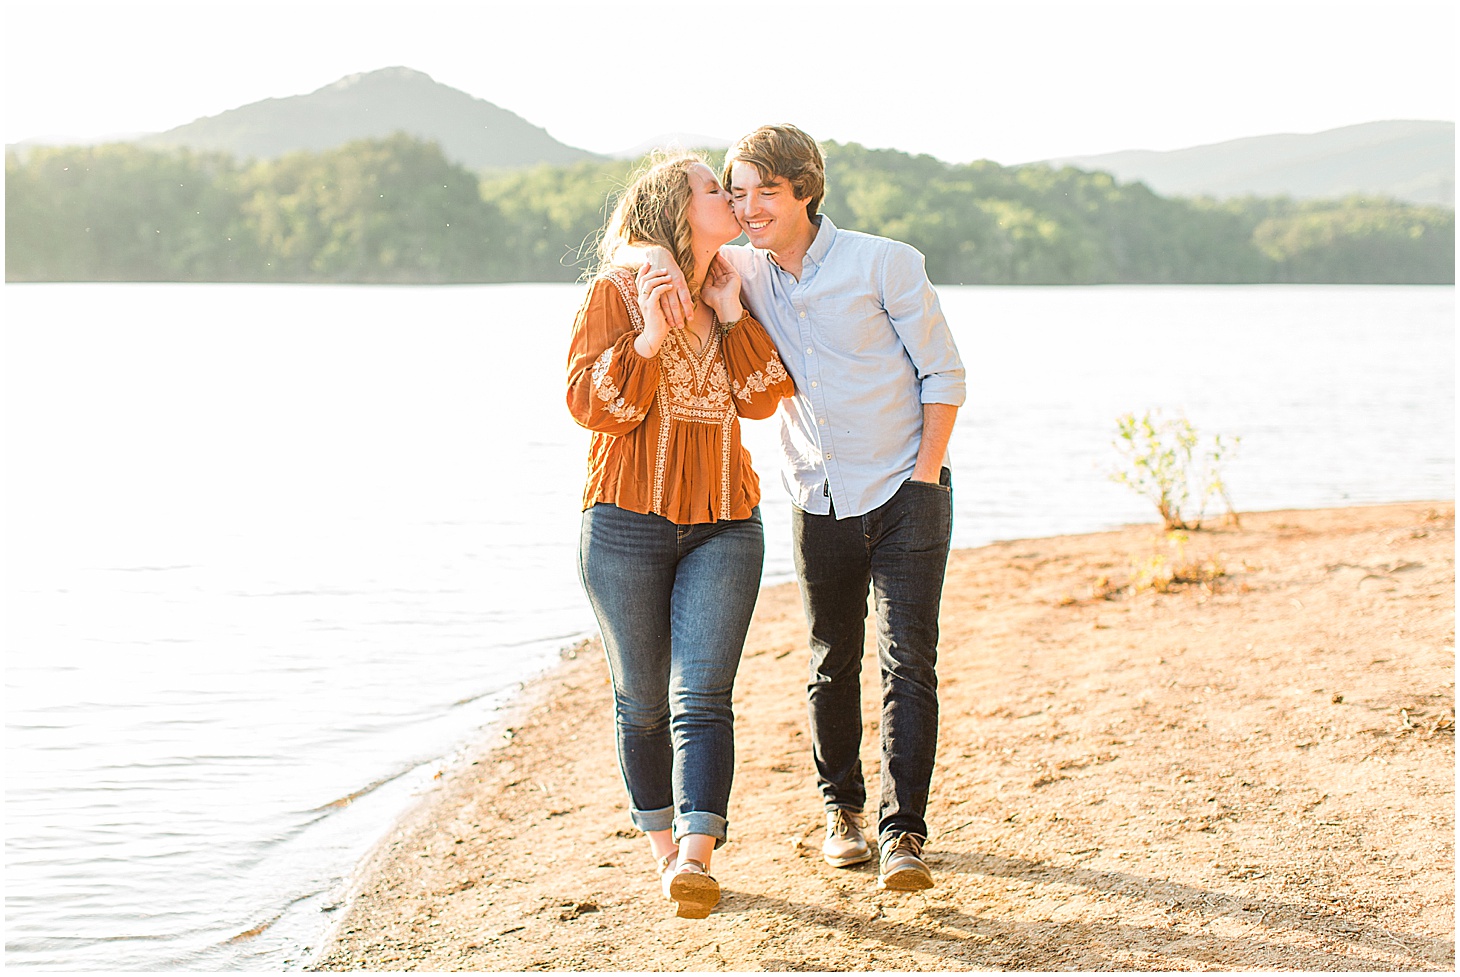 carvinscoveengagementsession_roanokeengagementsession_carvinscove_virginiawedding_virginiaweddingphotographer_vaweddingphotographer_photo_0029.jpg